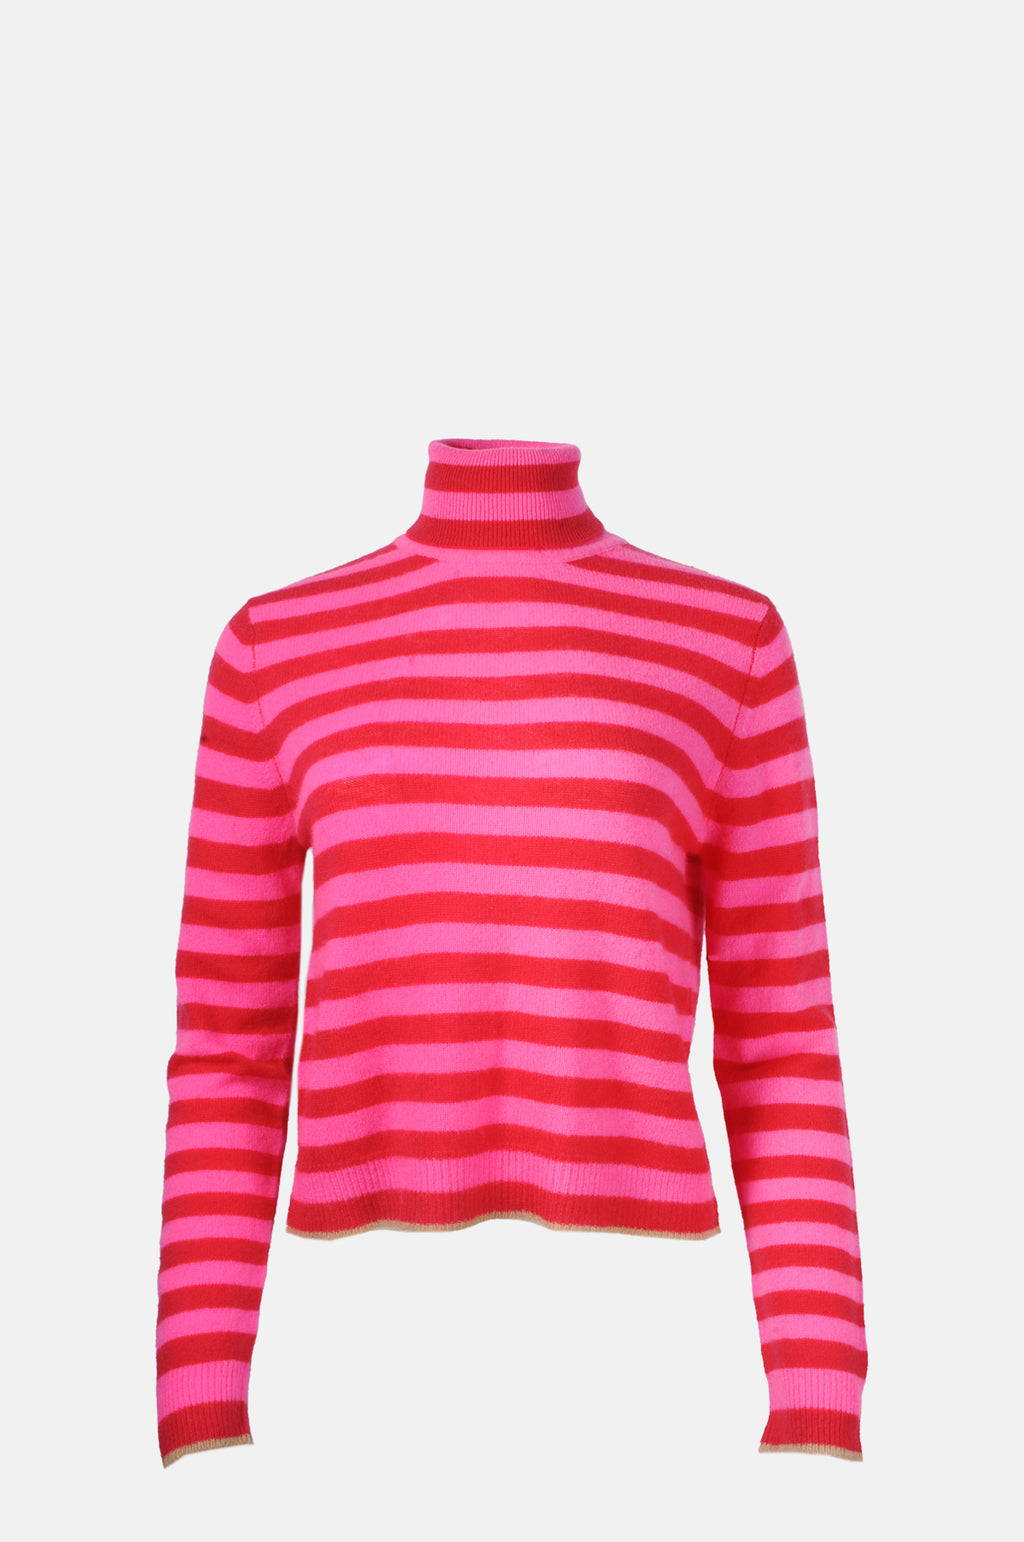 The Jumper 1234 Little Stripe Roll Collar in hot pink and cherry red.